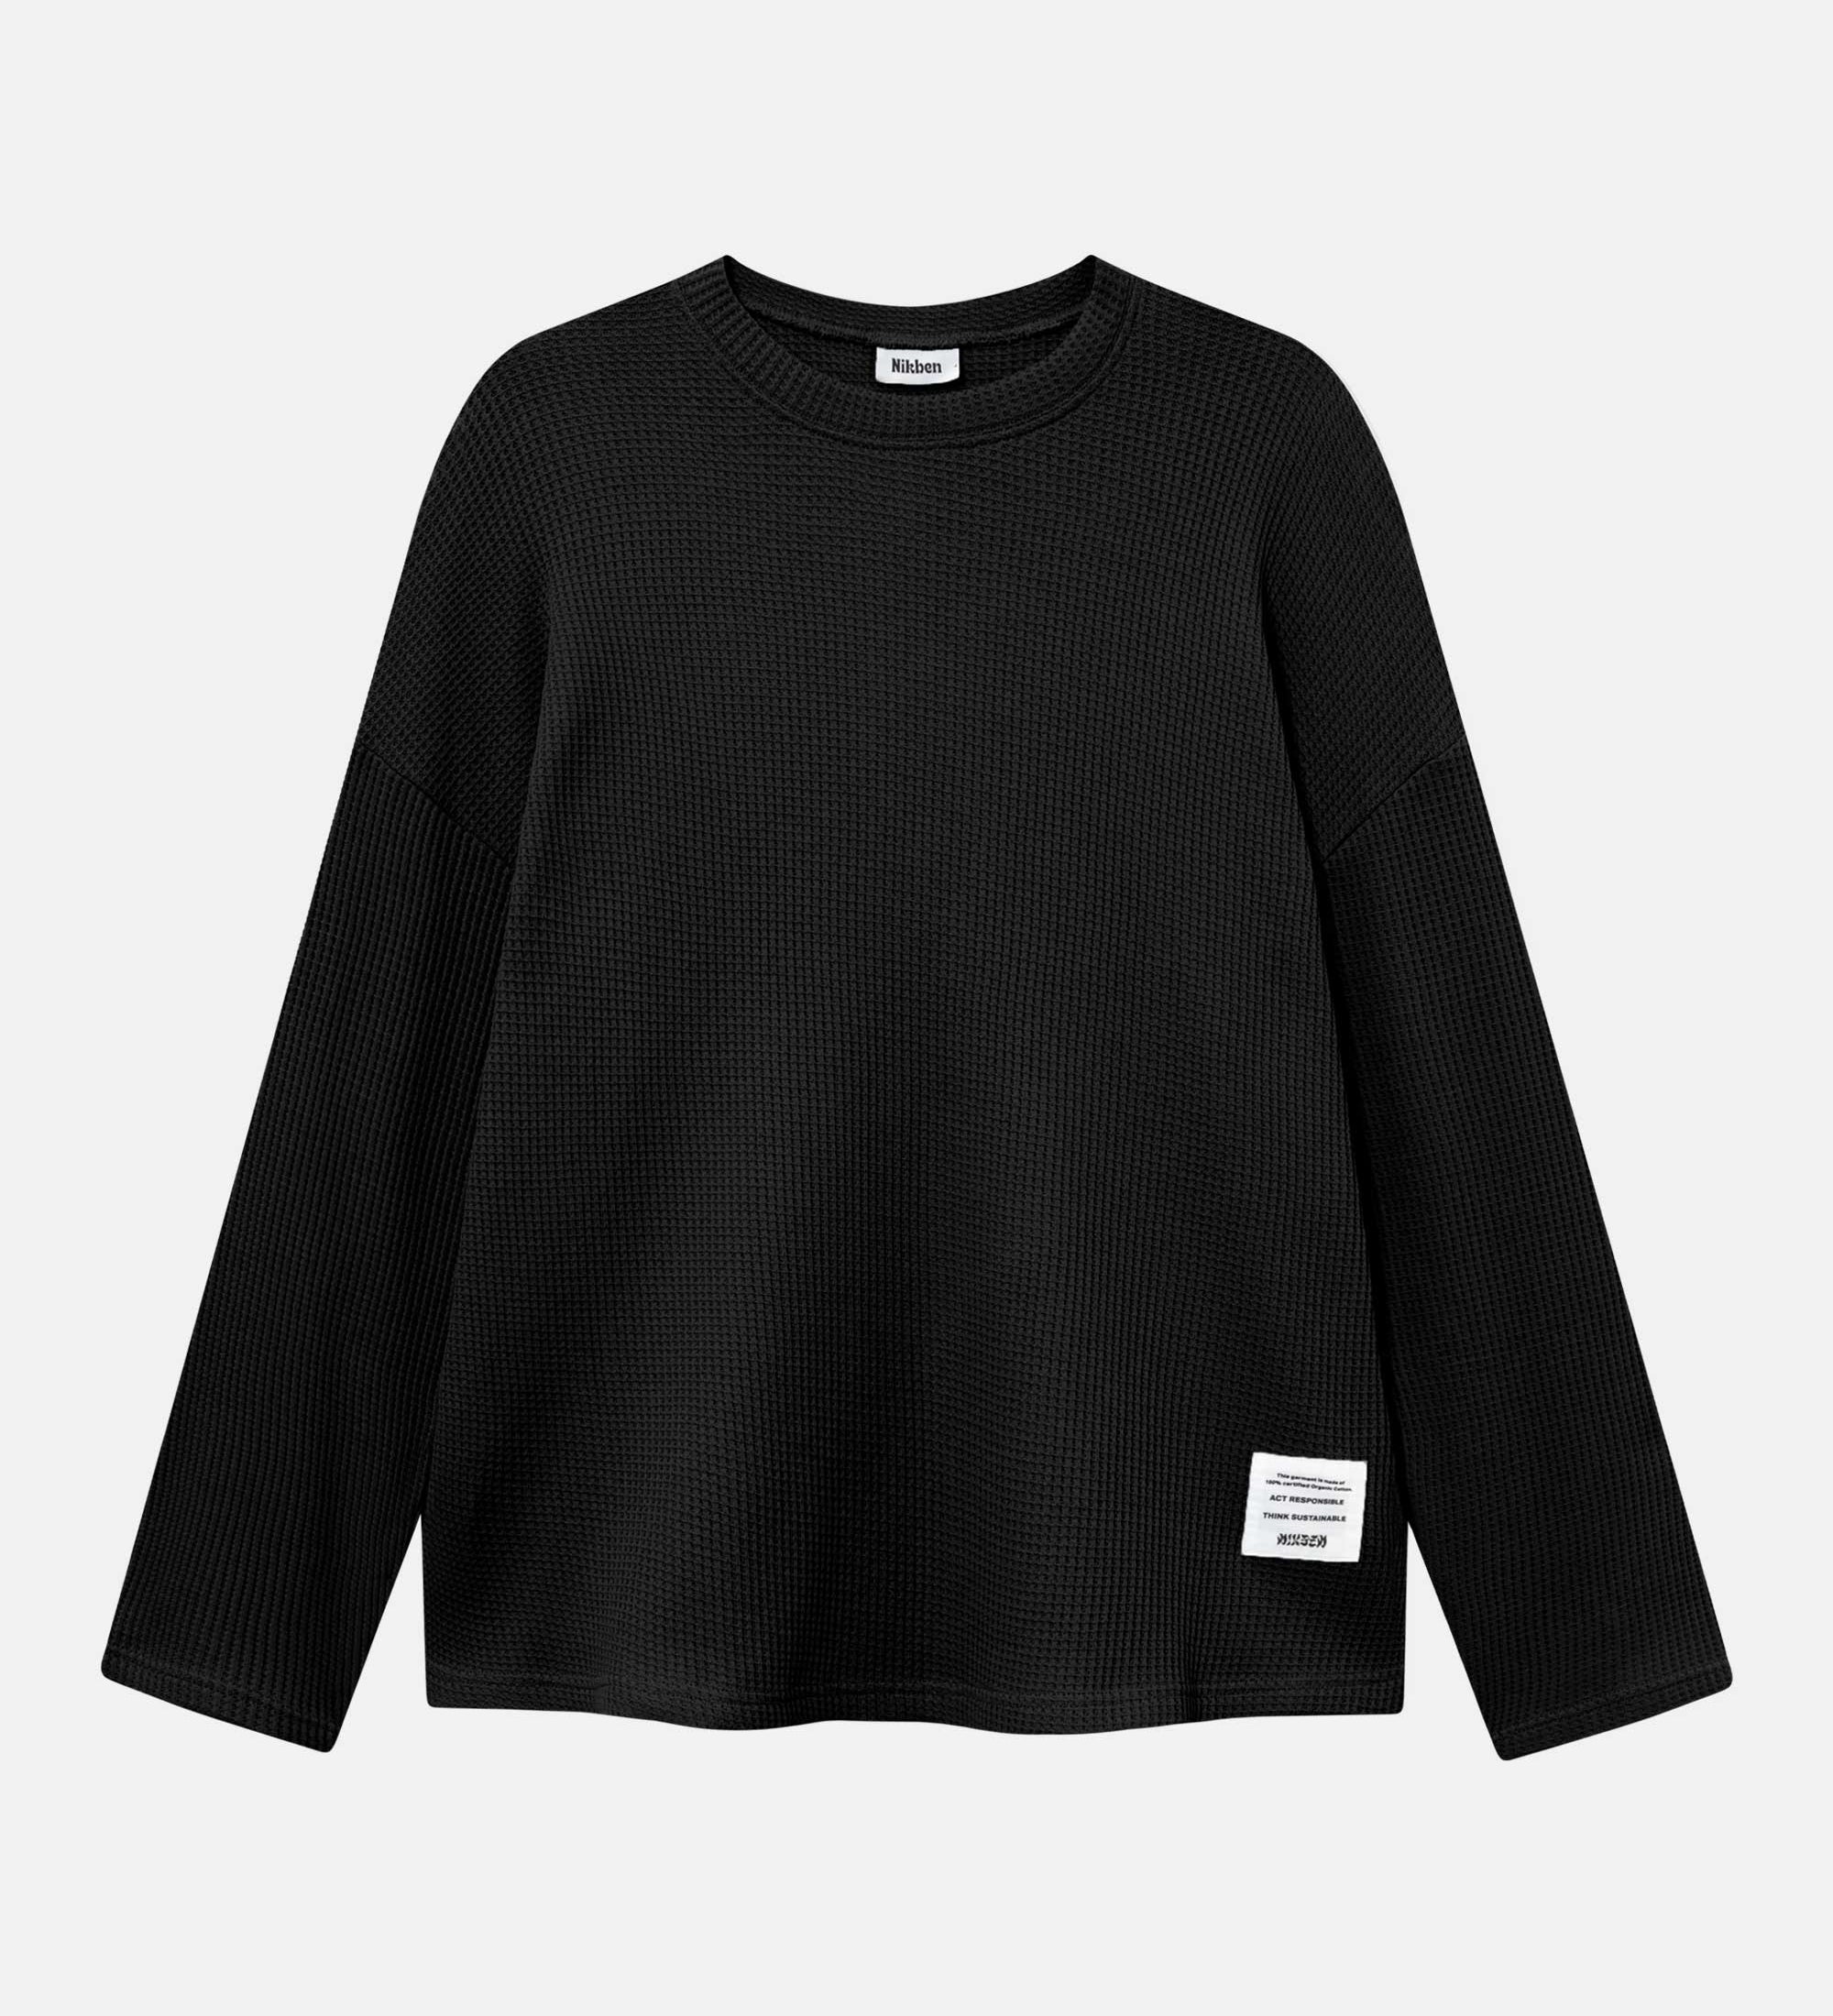 Black waffle-patterned sweatshirt with a stitched-on material label.